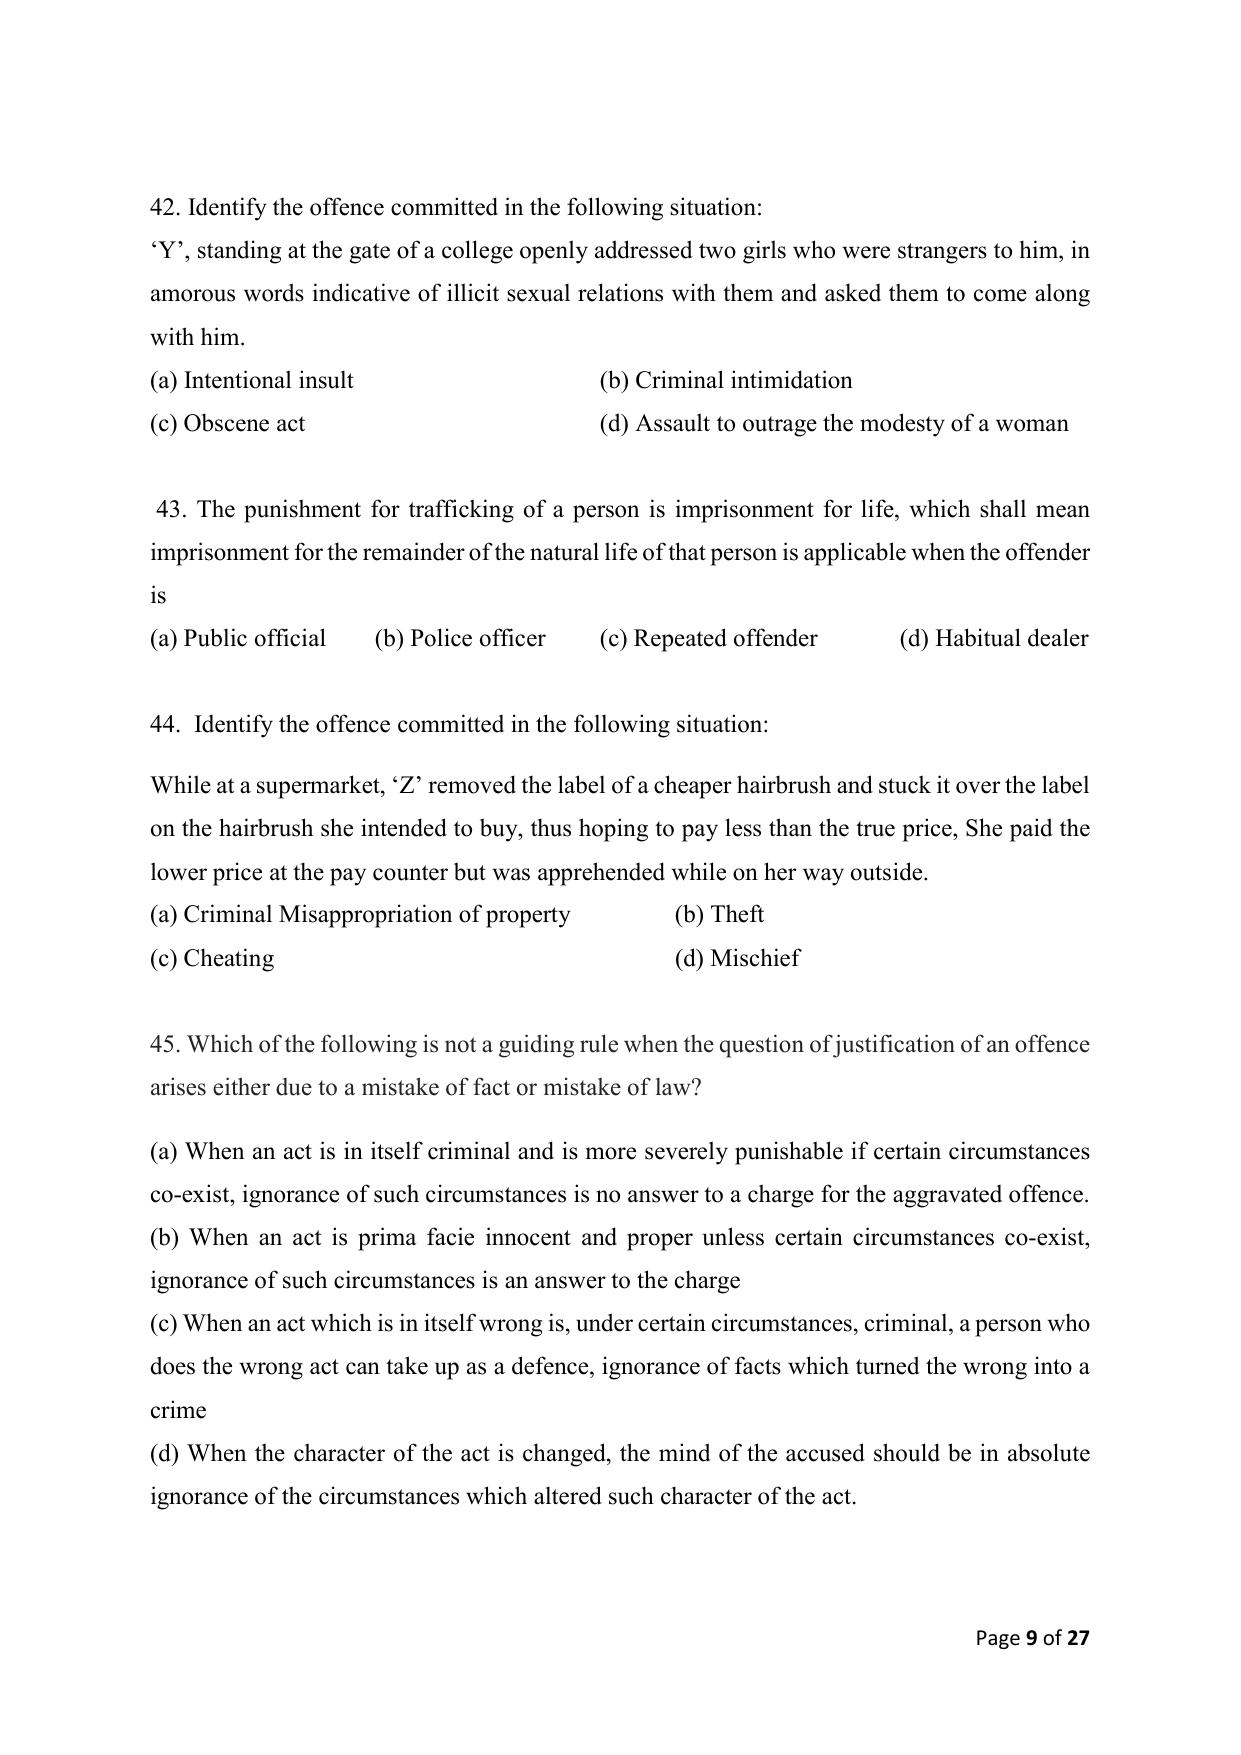 AILET 2020 Question Paper for LLM - Page 9